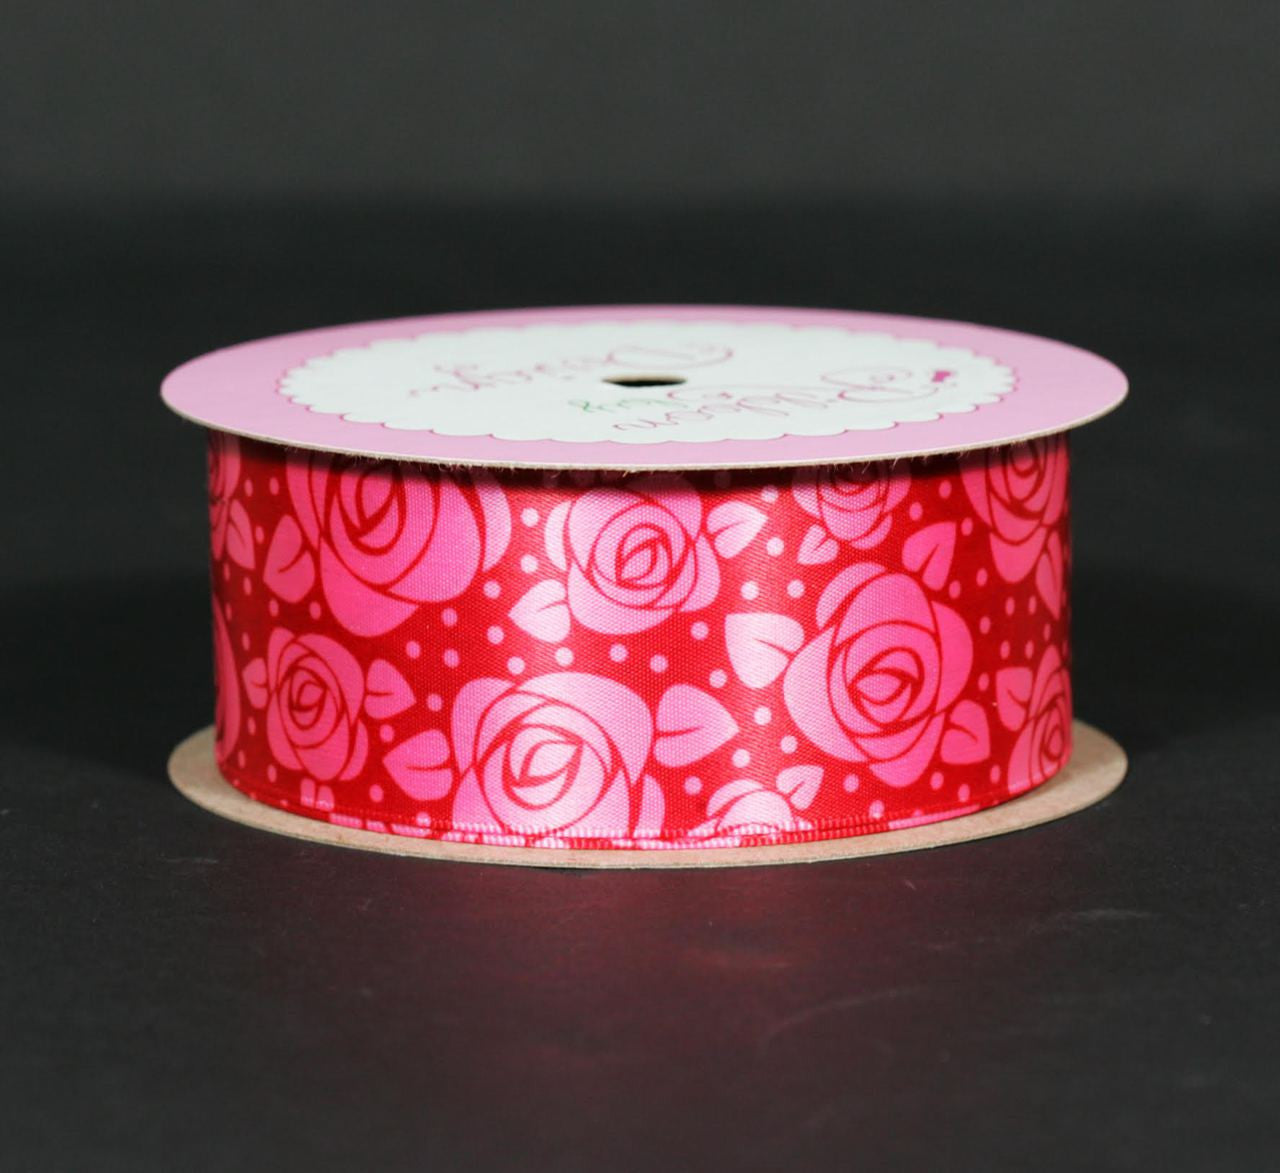 Stylized roses in hot pink on a deep pink background are the sweetest way to surprise your Valentine. This ribbon is 1.5" wide in hot pink single face satin ribbon.